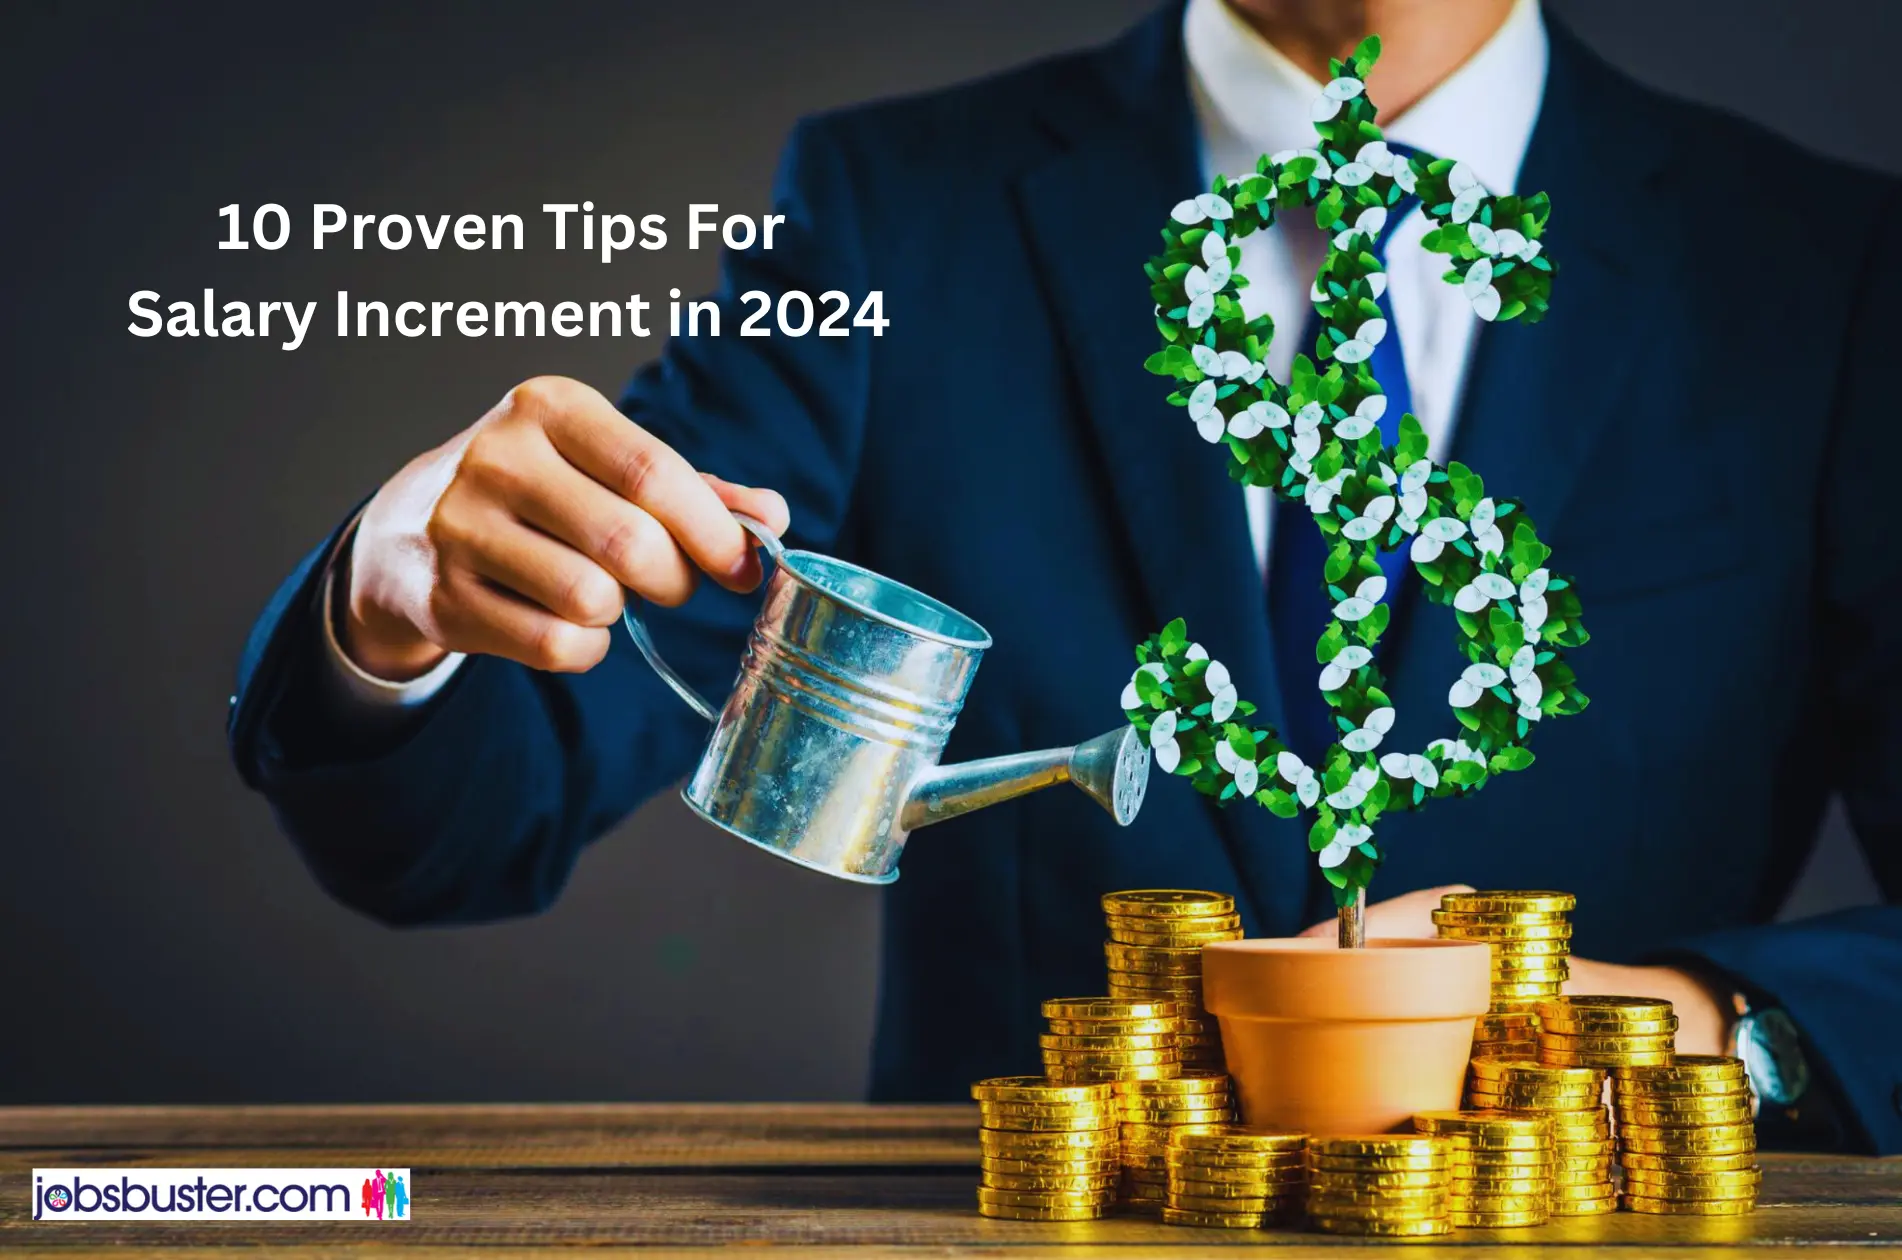 10 Proven Tips For Salary Increment in 2024